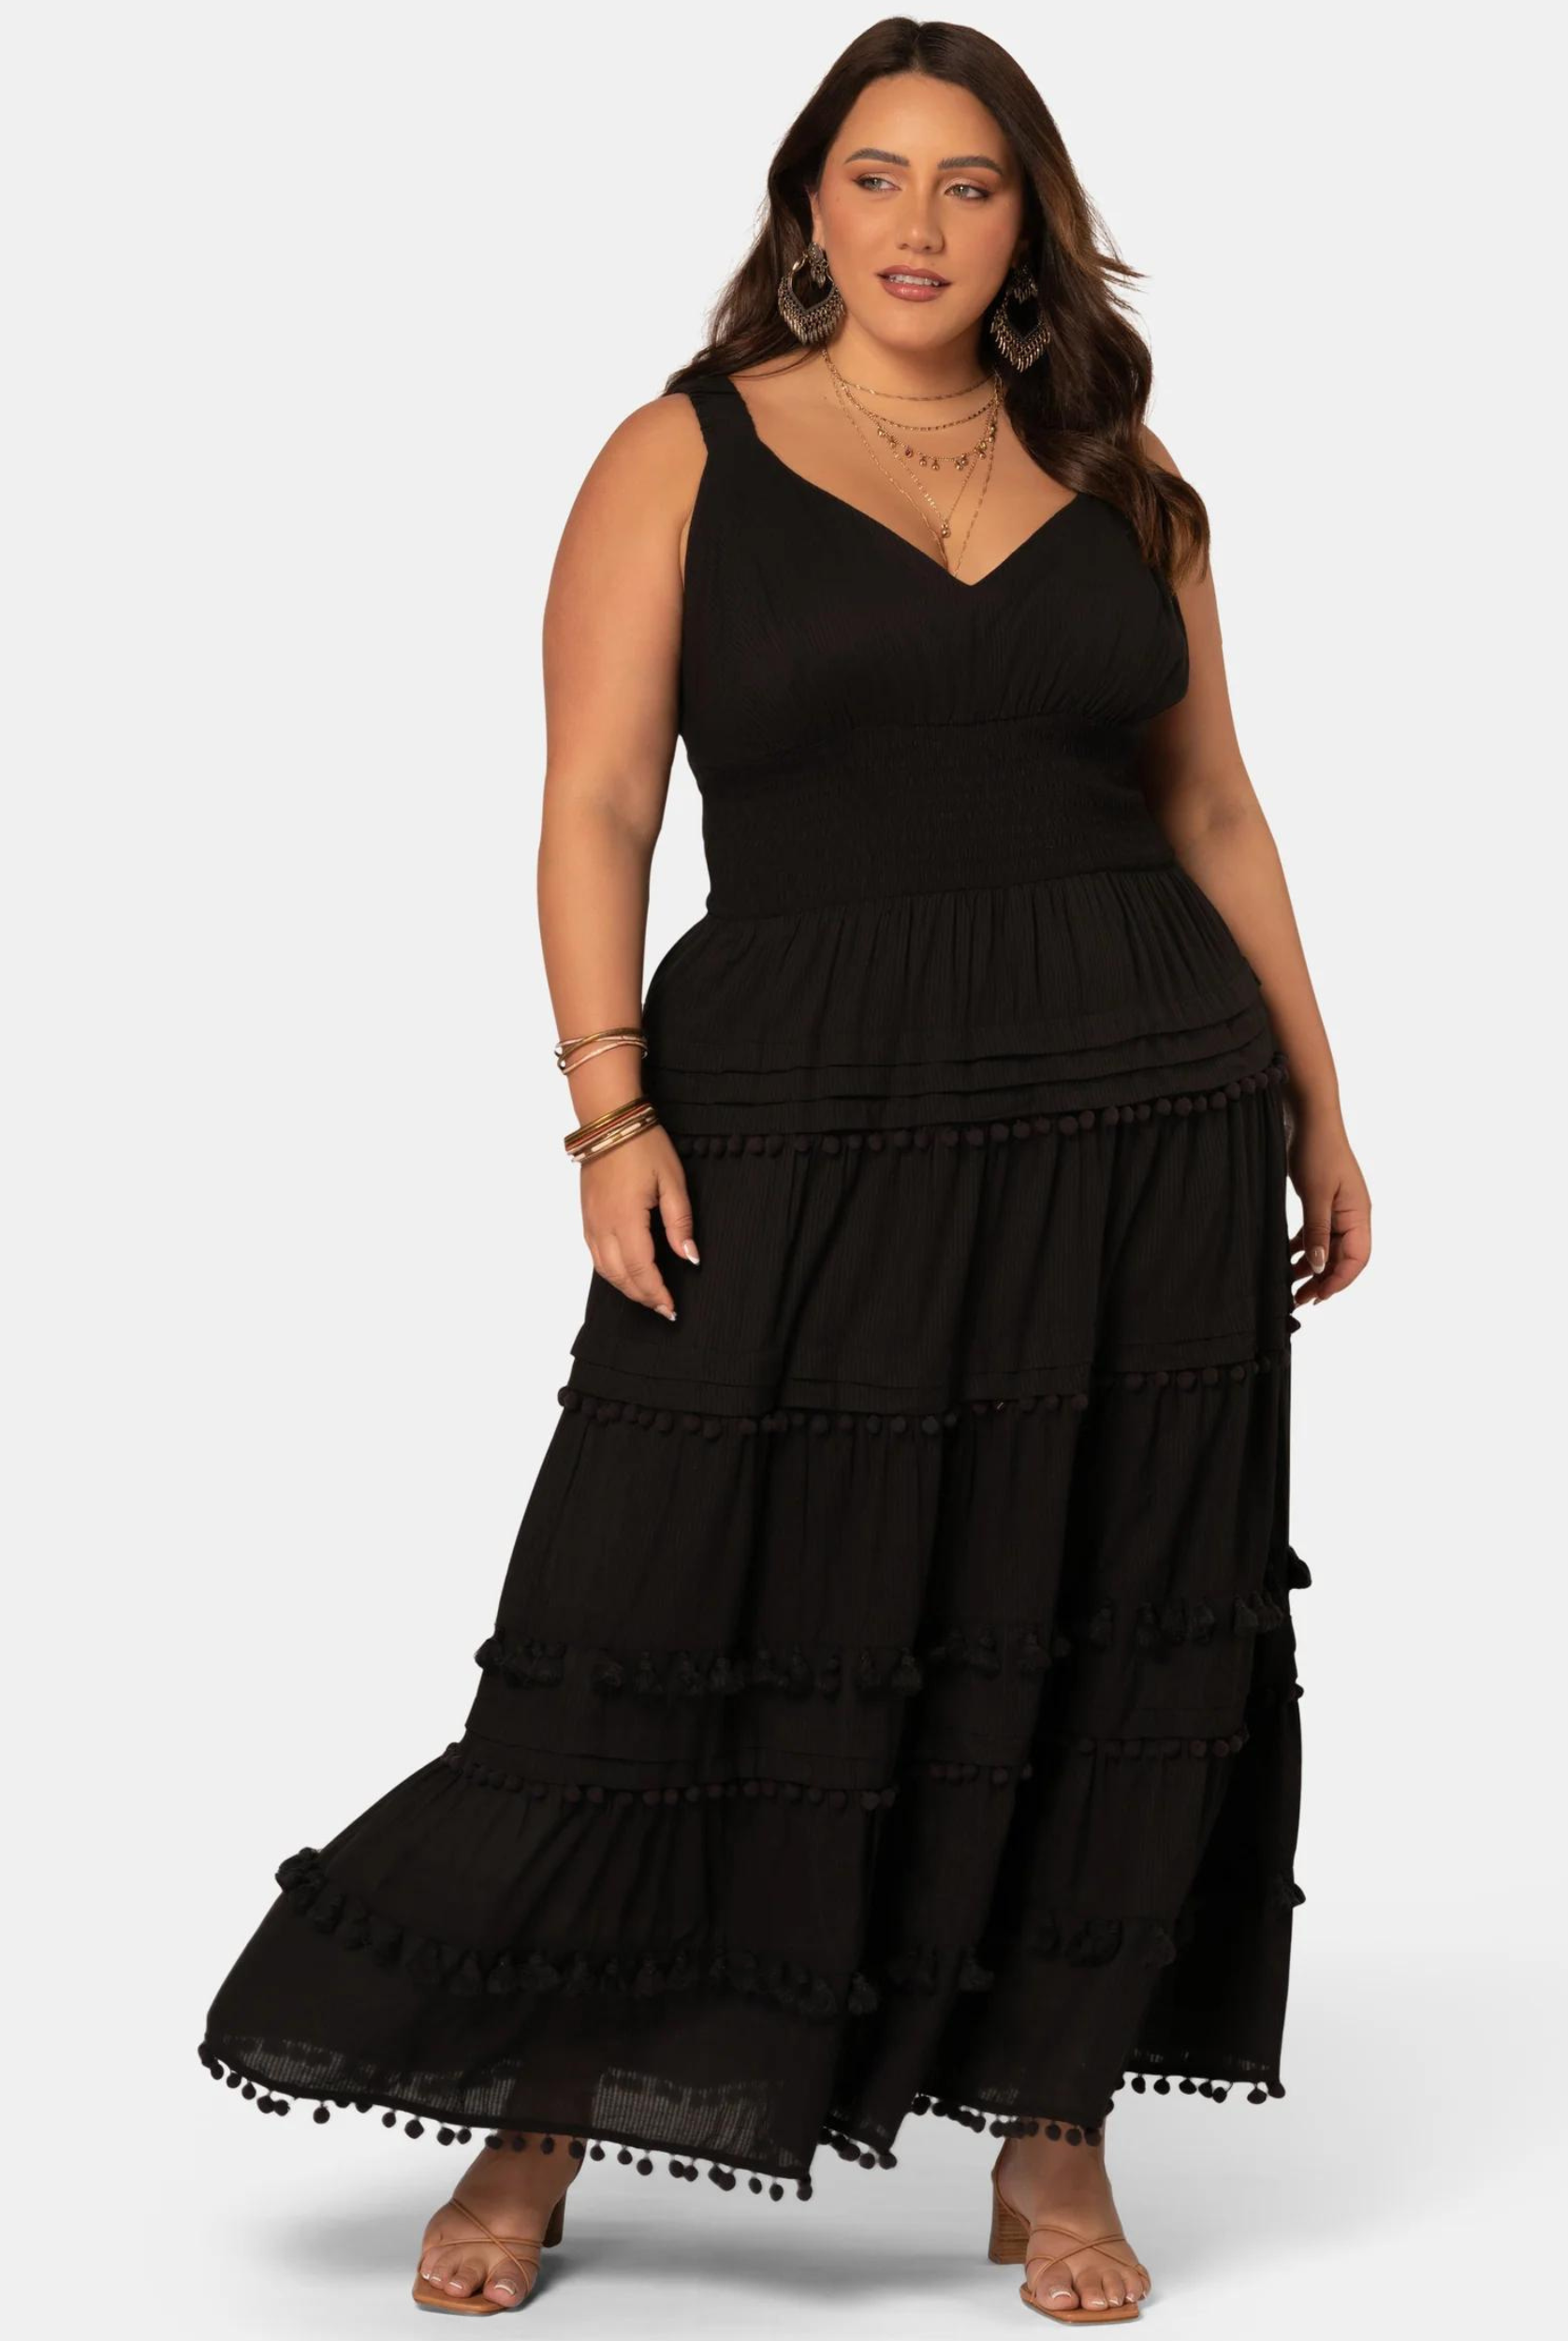 Curve model wearing the Malibu Maxi Dress from The Poetic Gypsy